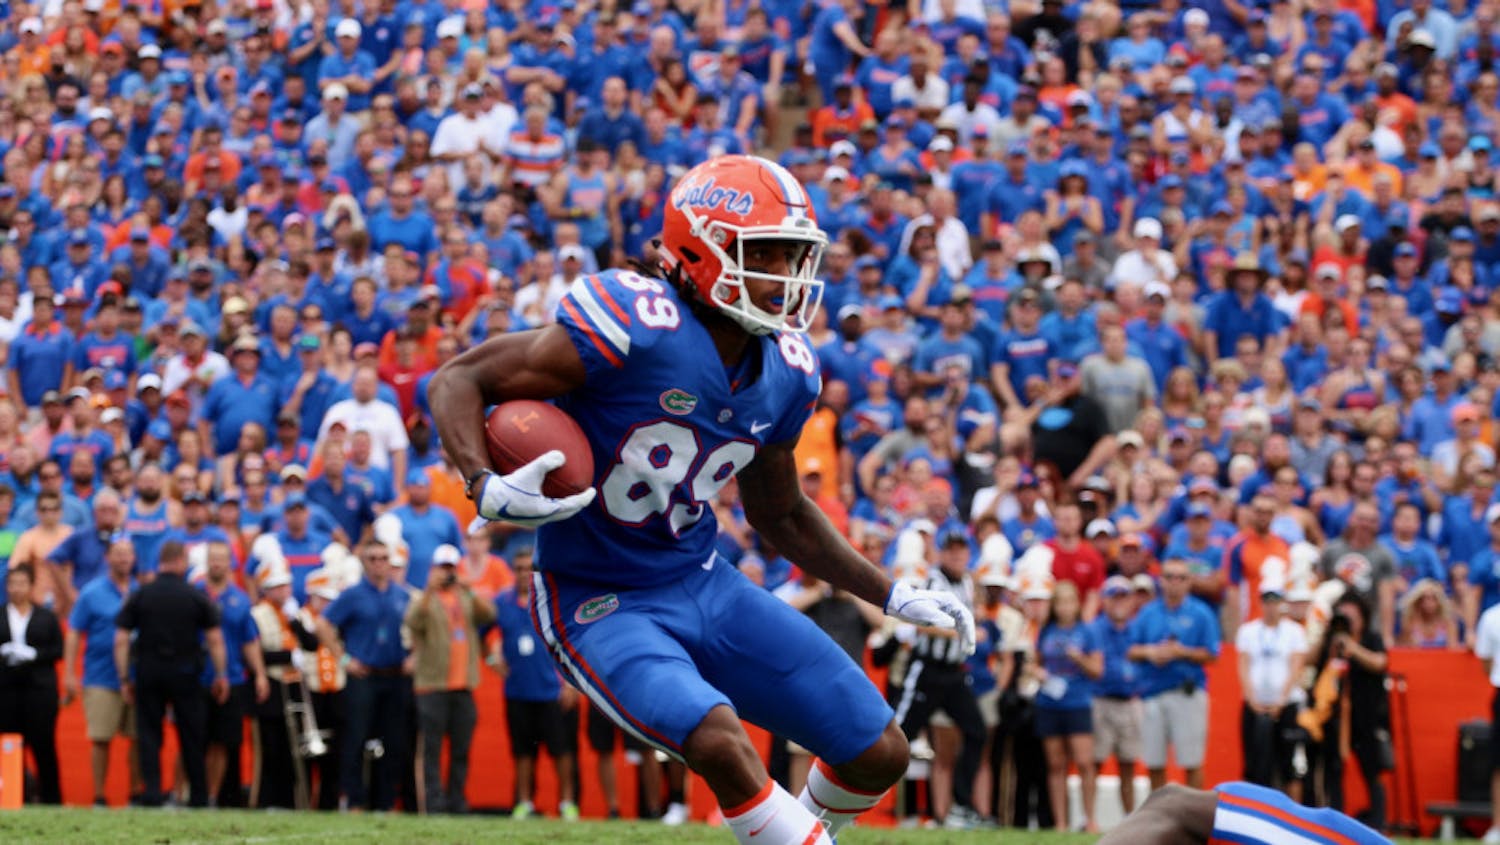 UF wide receiver Tyrie Cleveland runs with the ball after a catch during Florida's 26-10 win against Tennessee on Saturday at Ben Hill Griffin Stadium.